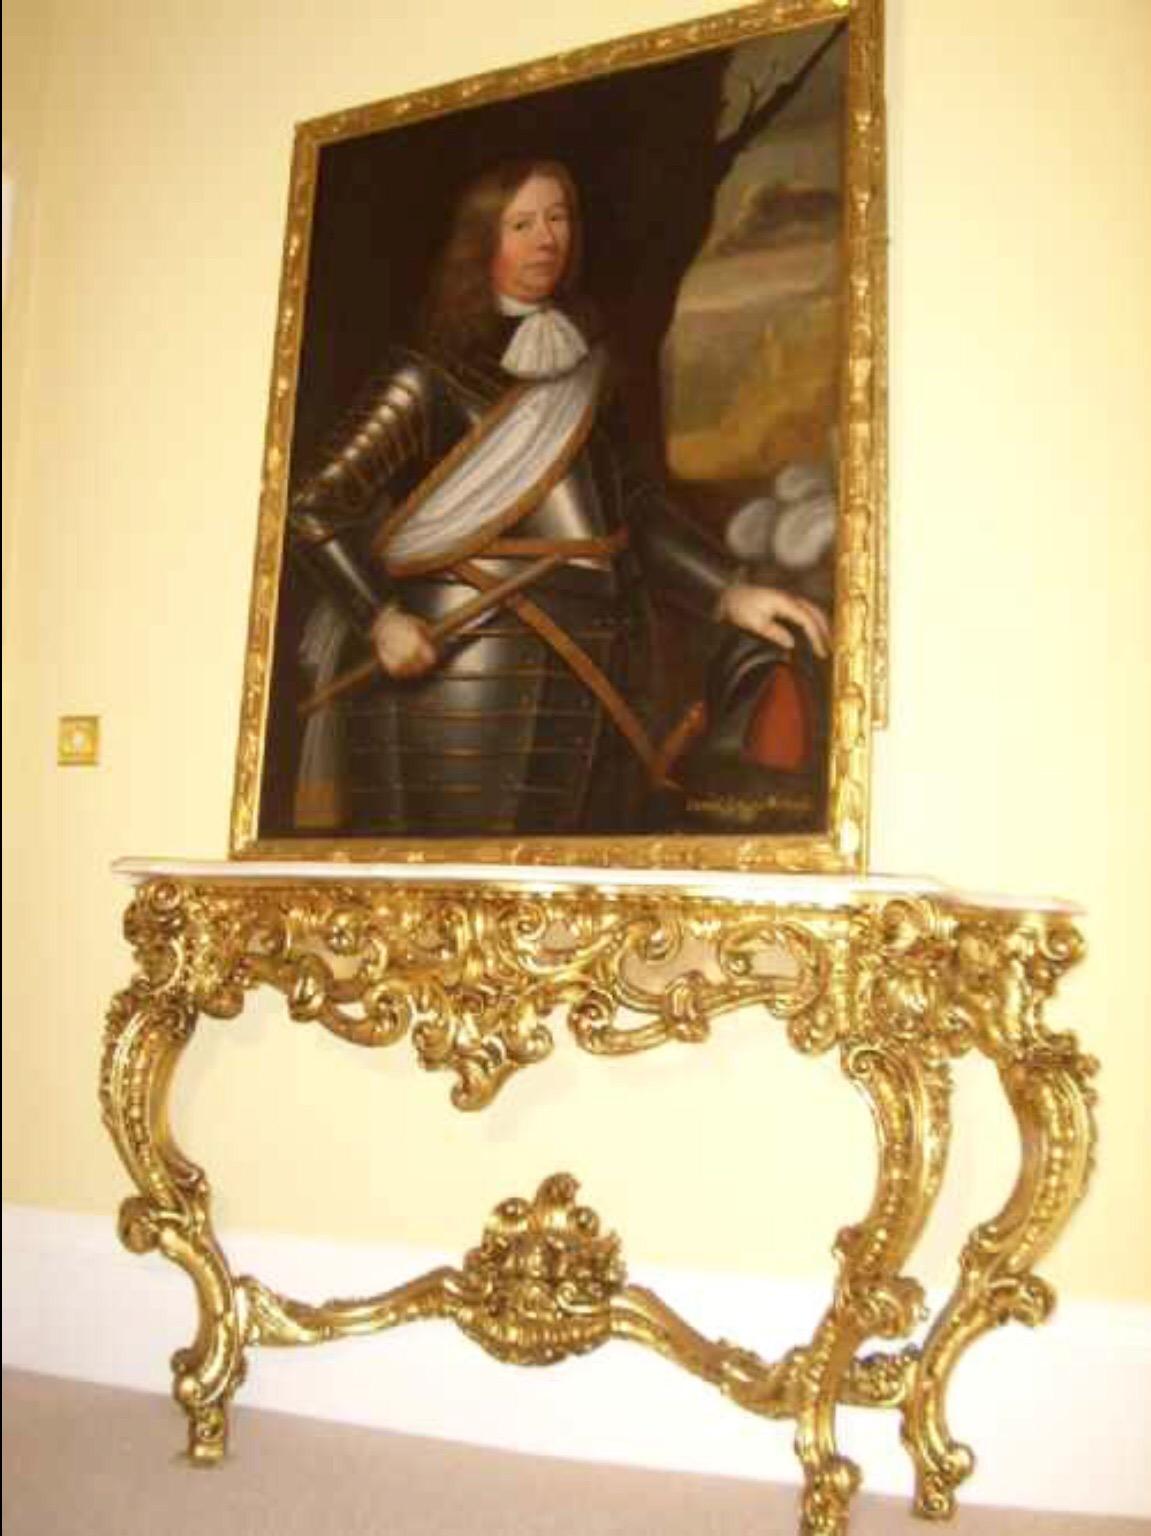 A fine three quarter late 17th century oil portrait on canvas presented in a period carved wooden gilded frame.

SITTER
DAVID 2ND EART WEMYSS wears his full suit of gleaming armour almost tailored to his substantial size,a weightly looking gentleman